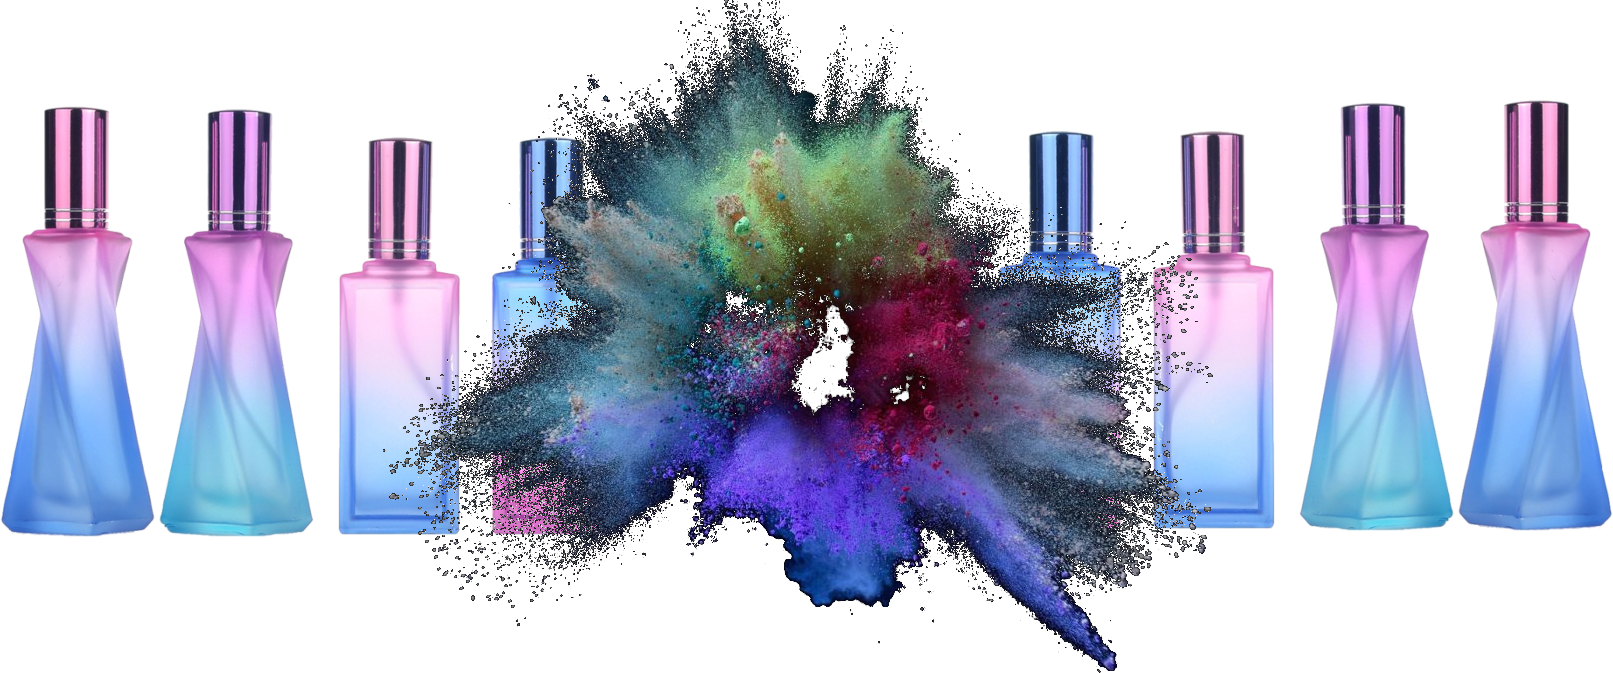 A Group Of Bottles With Colored Powder Exploding